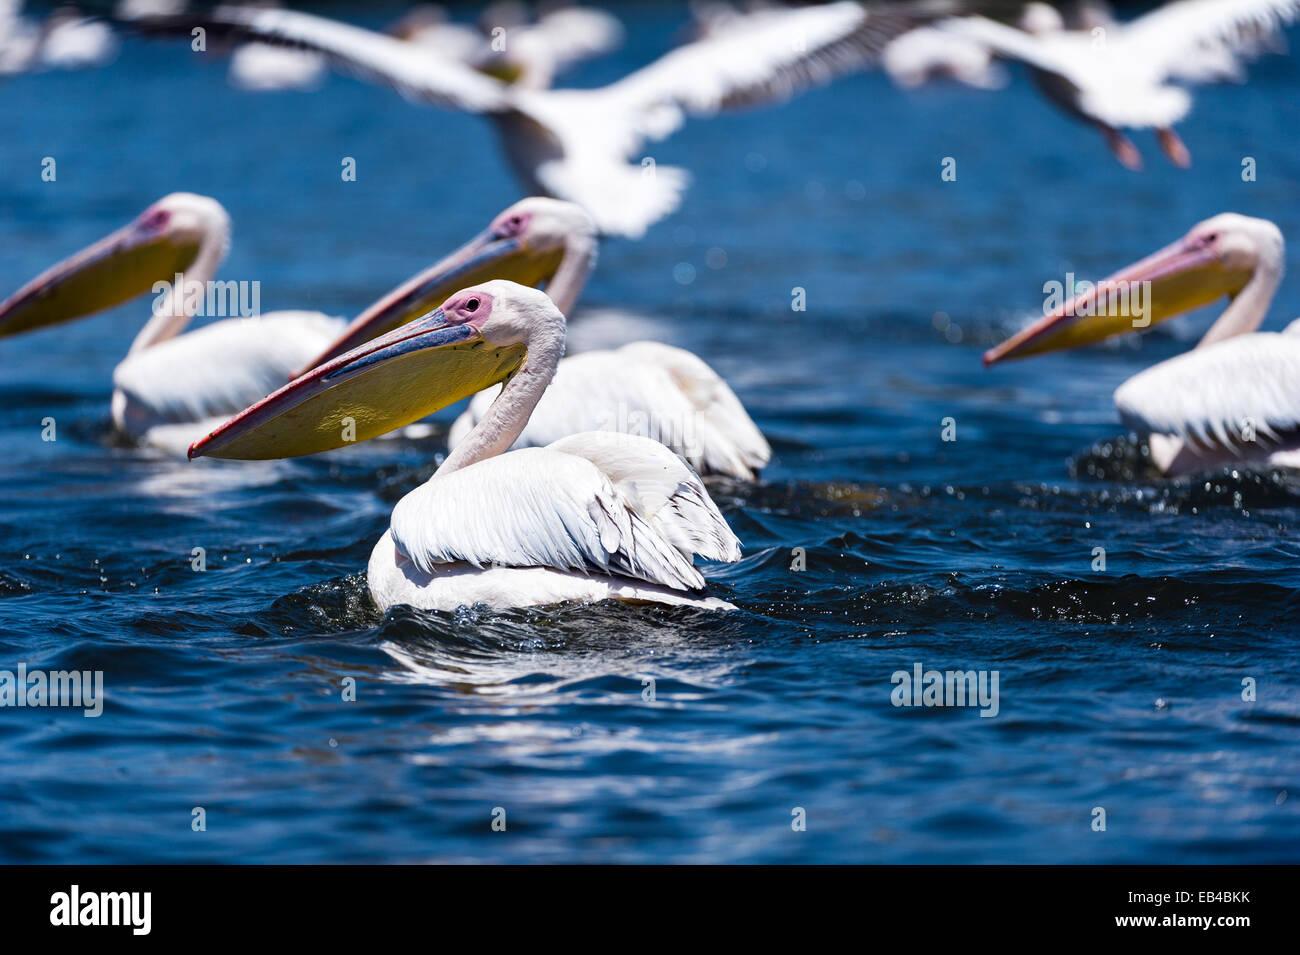 A flock of great white pelicans swimming on the surface of a flooded freshwater lake. Stock Photo